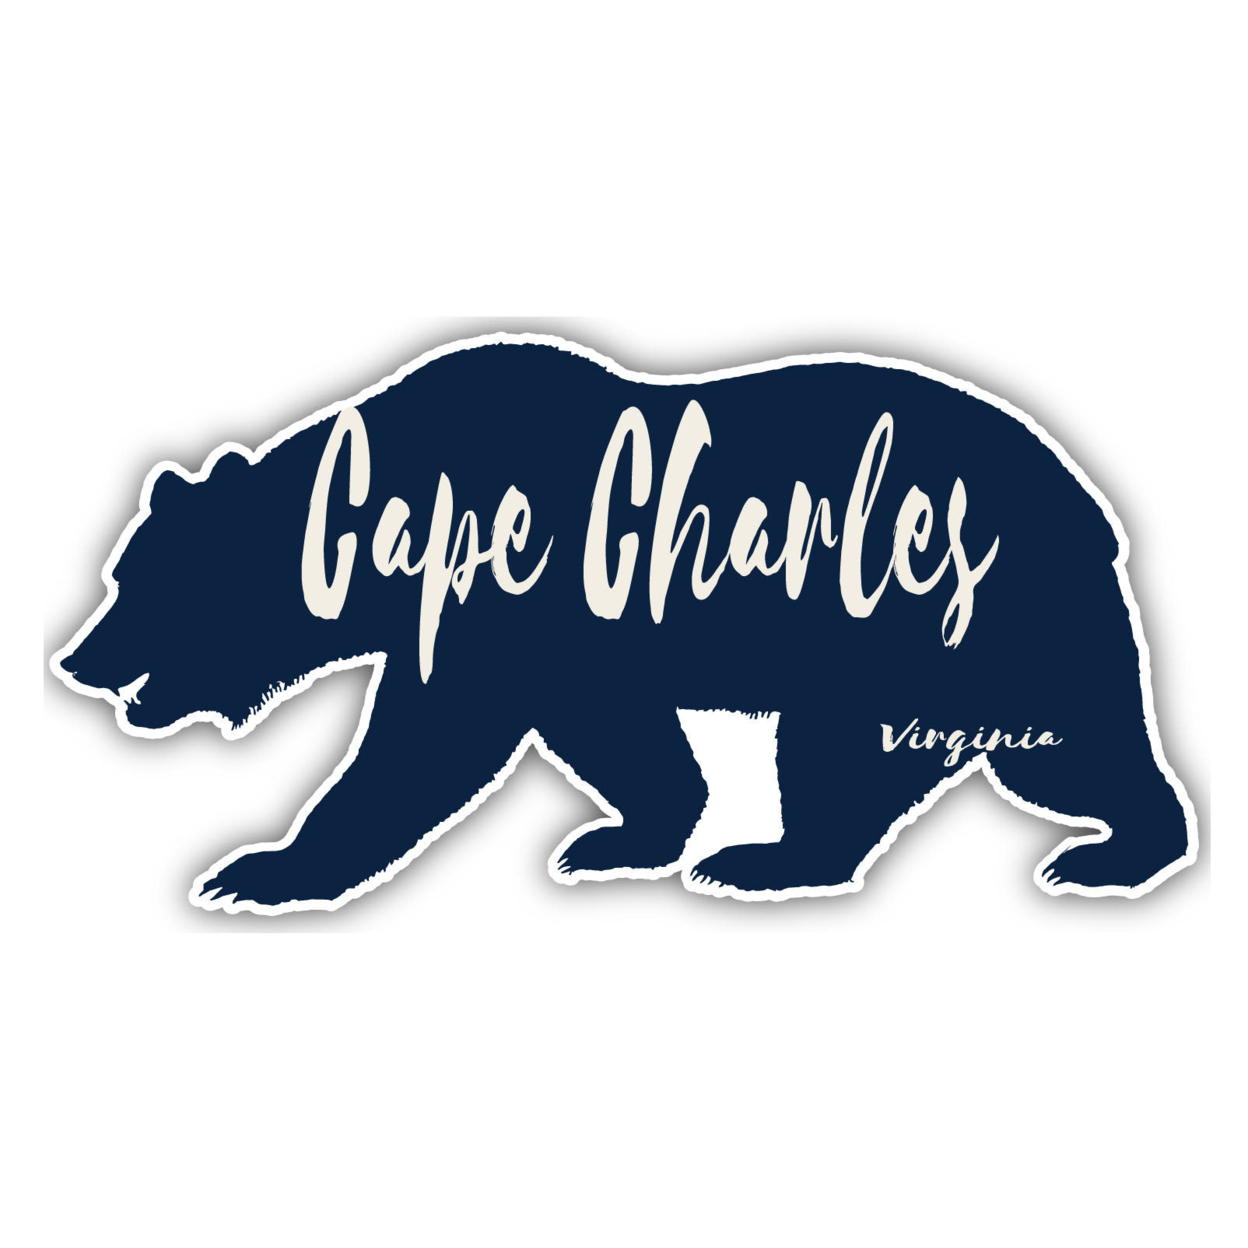 Cape Charles Virginia Souvenir Decorative Stickers (Choose Theme And Size) - 4-Pack, 10-Inch, Bear